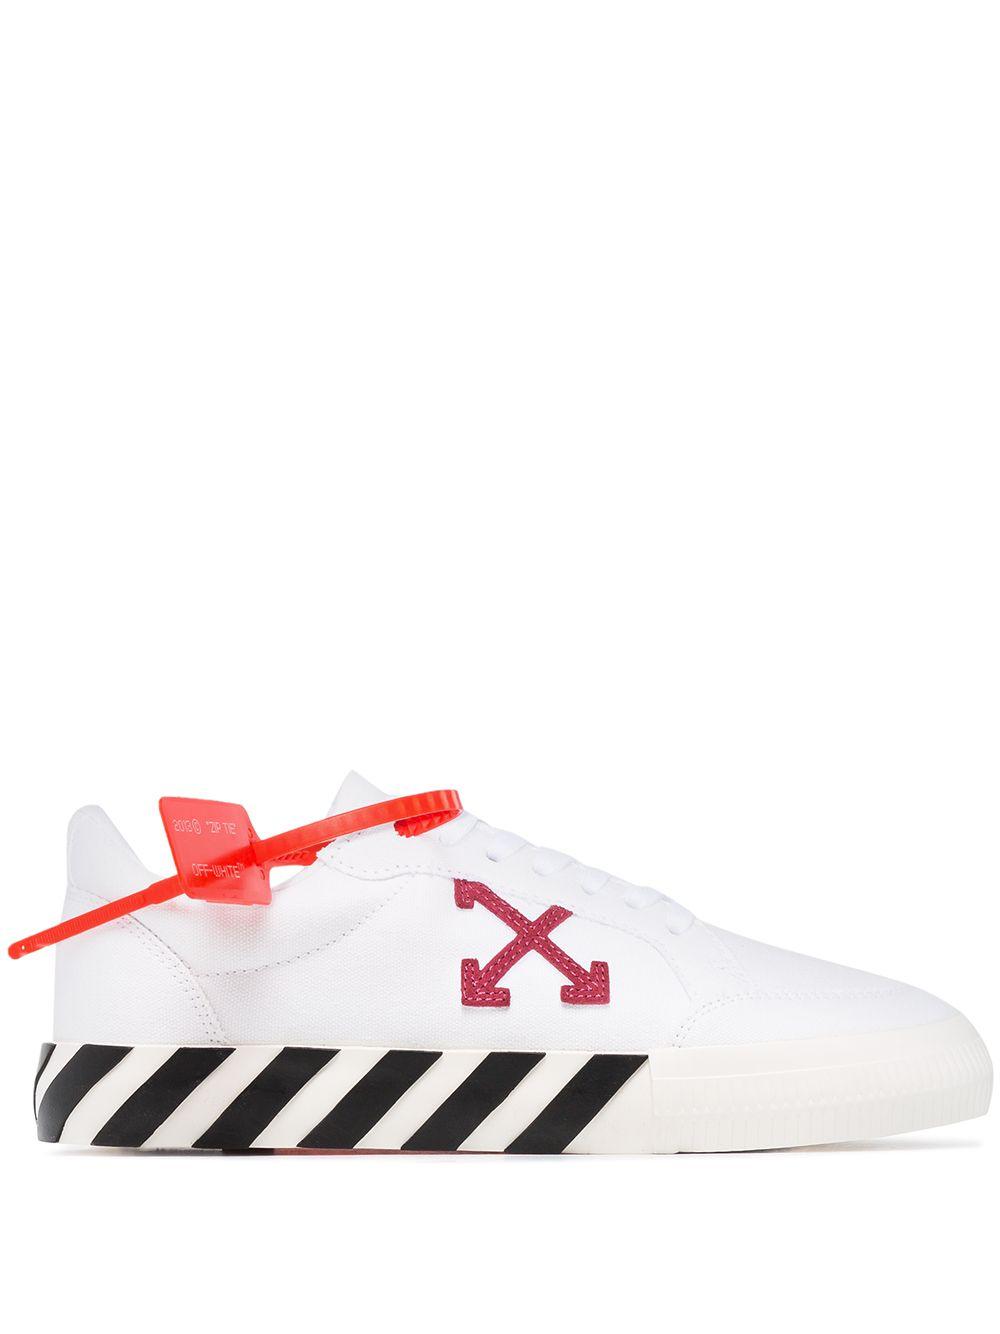 Off-White c/o Virgil Abloh Low Vulcanized Canvas Sneakers in White | Lyst  Australia